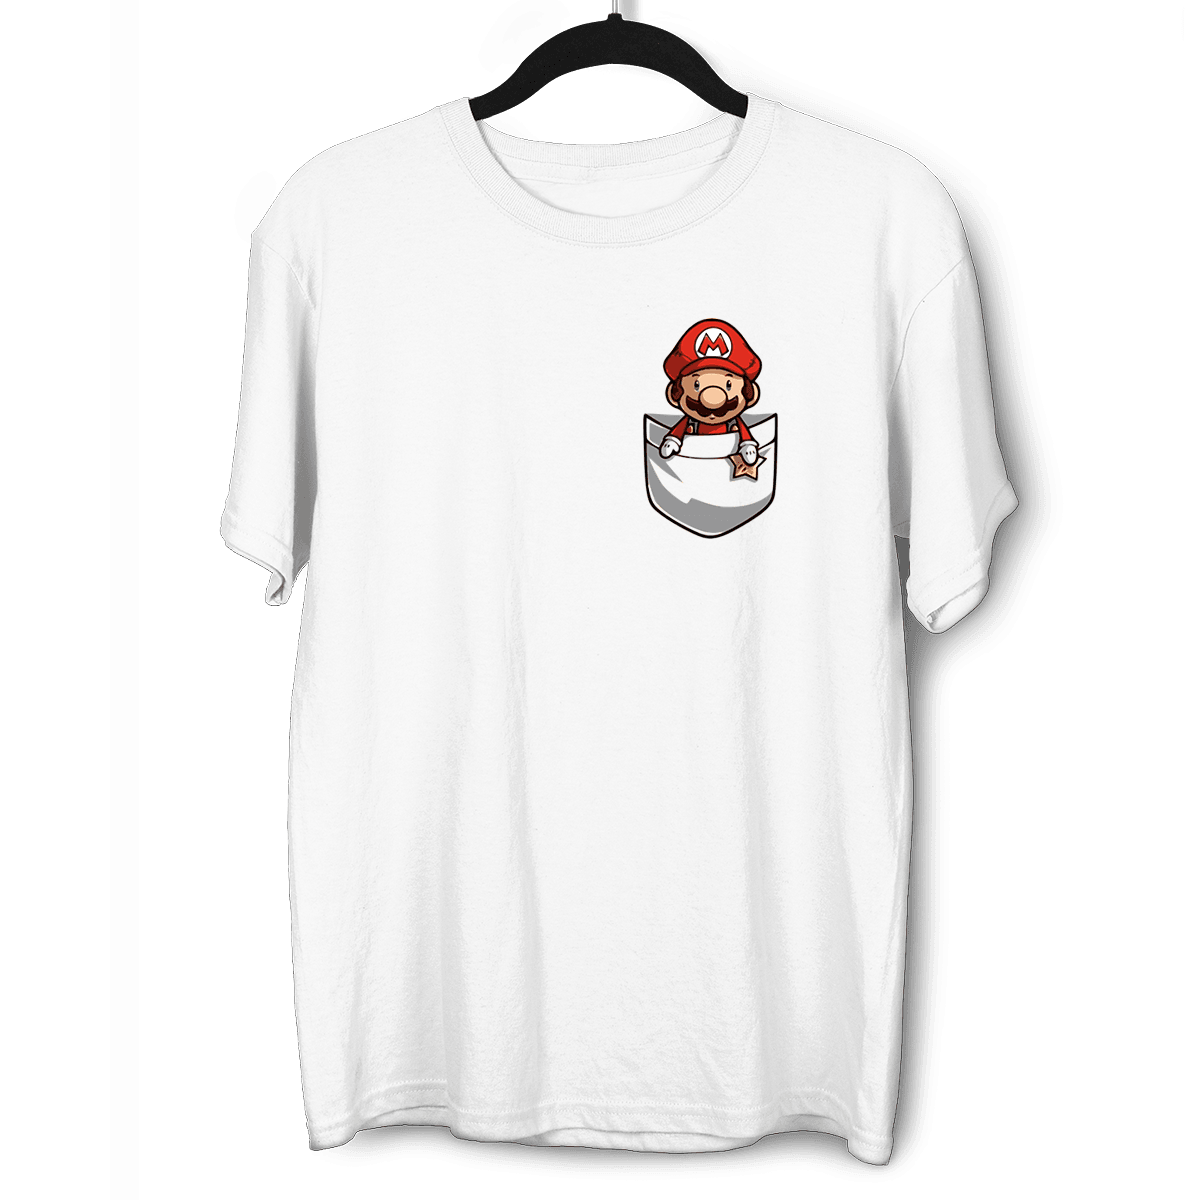 Cute Super Mario in the pocket Nintendo SNES for All retro Minds White M Unisex T-Shirt - Discounted - Kuzi Tees